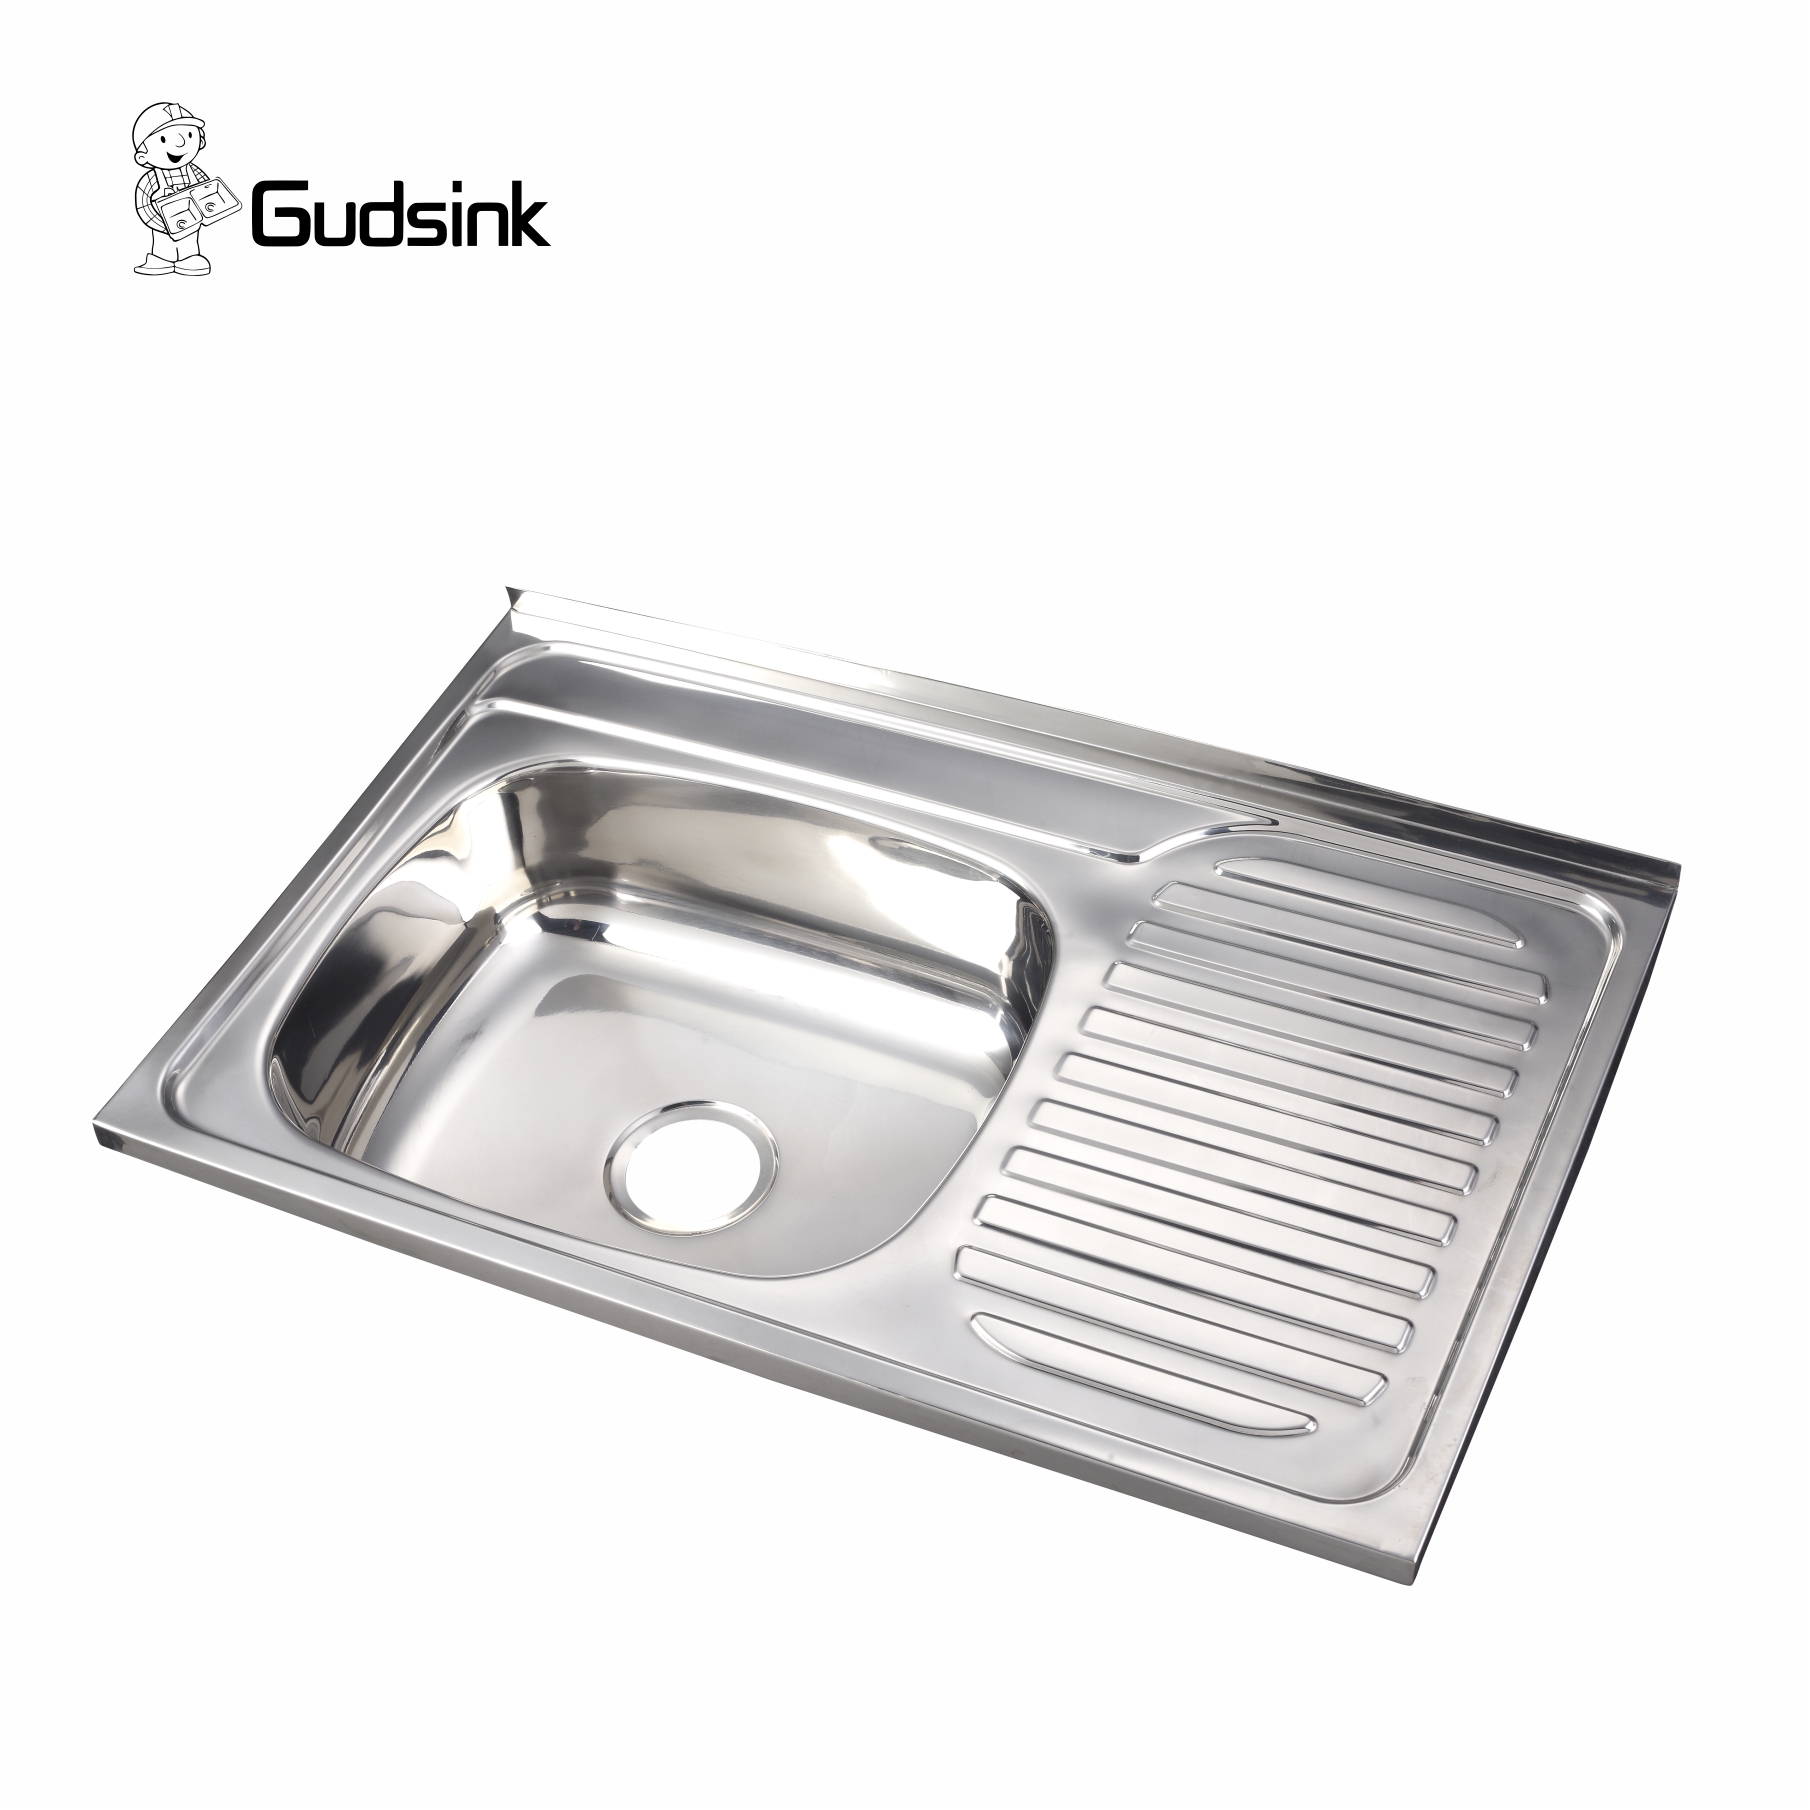 how to disinfect a stainless steel sink